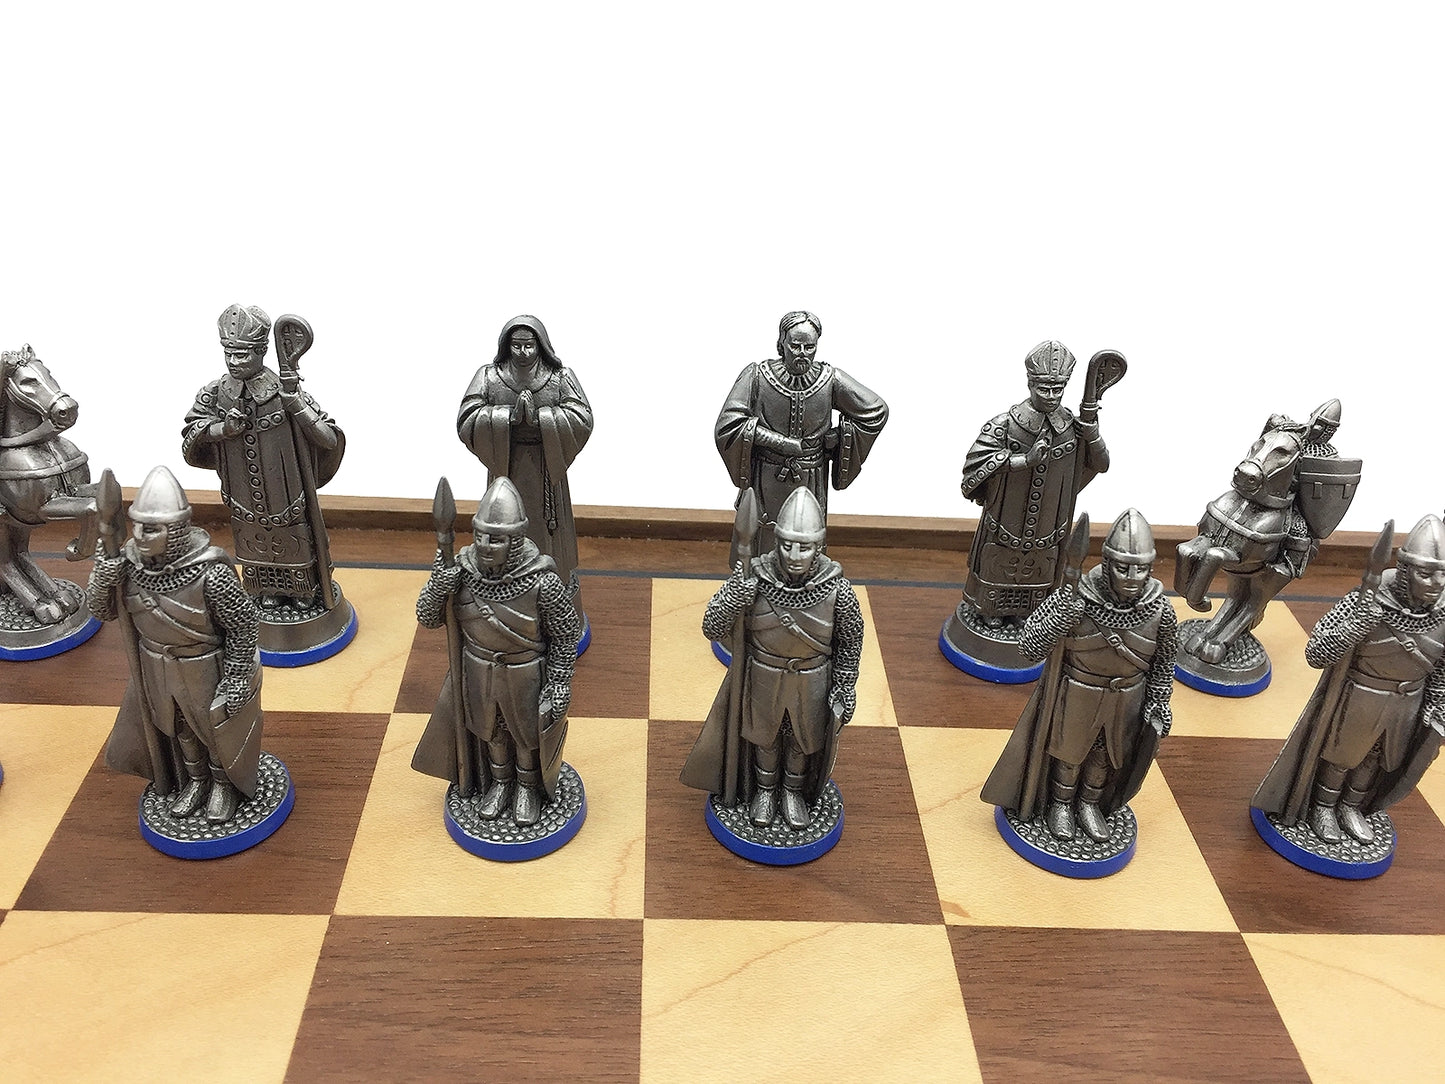 Toy soldier miniature army men Robin Hood Chess Set. Antique finish. Monks.